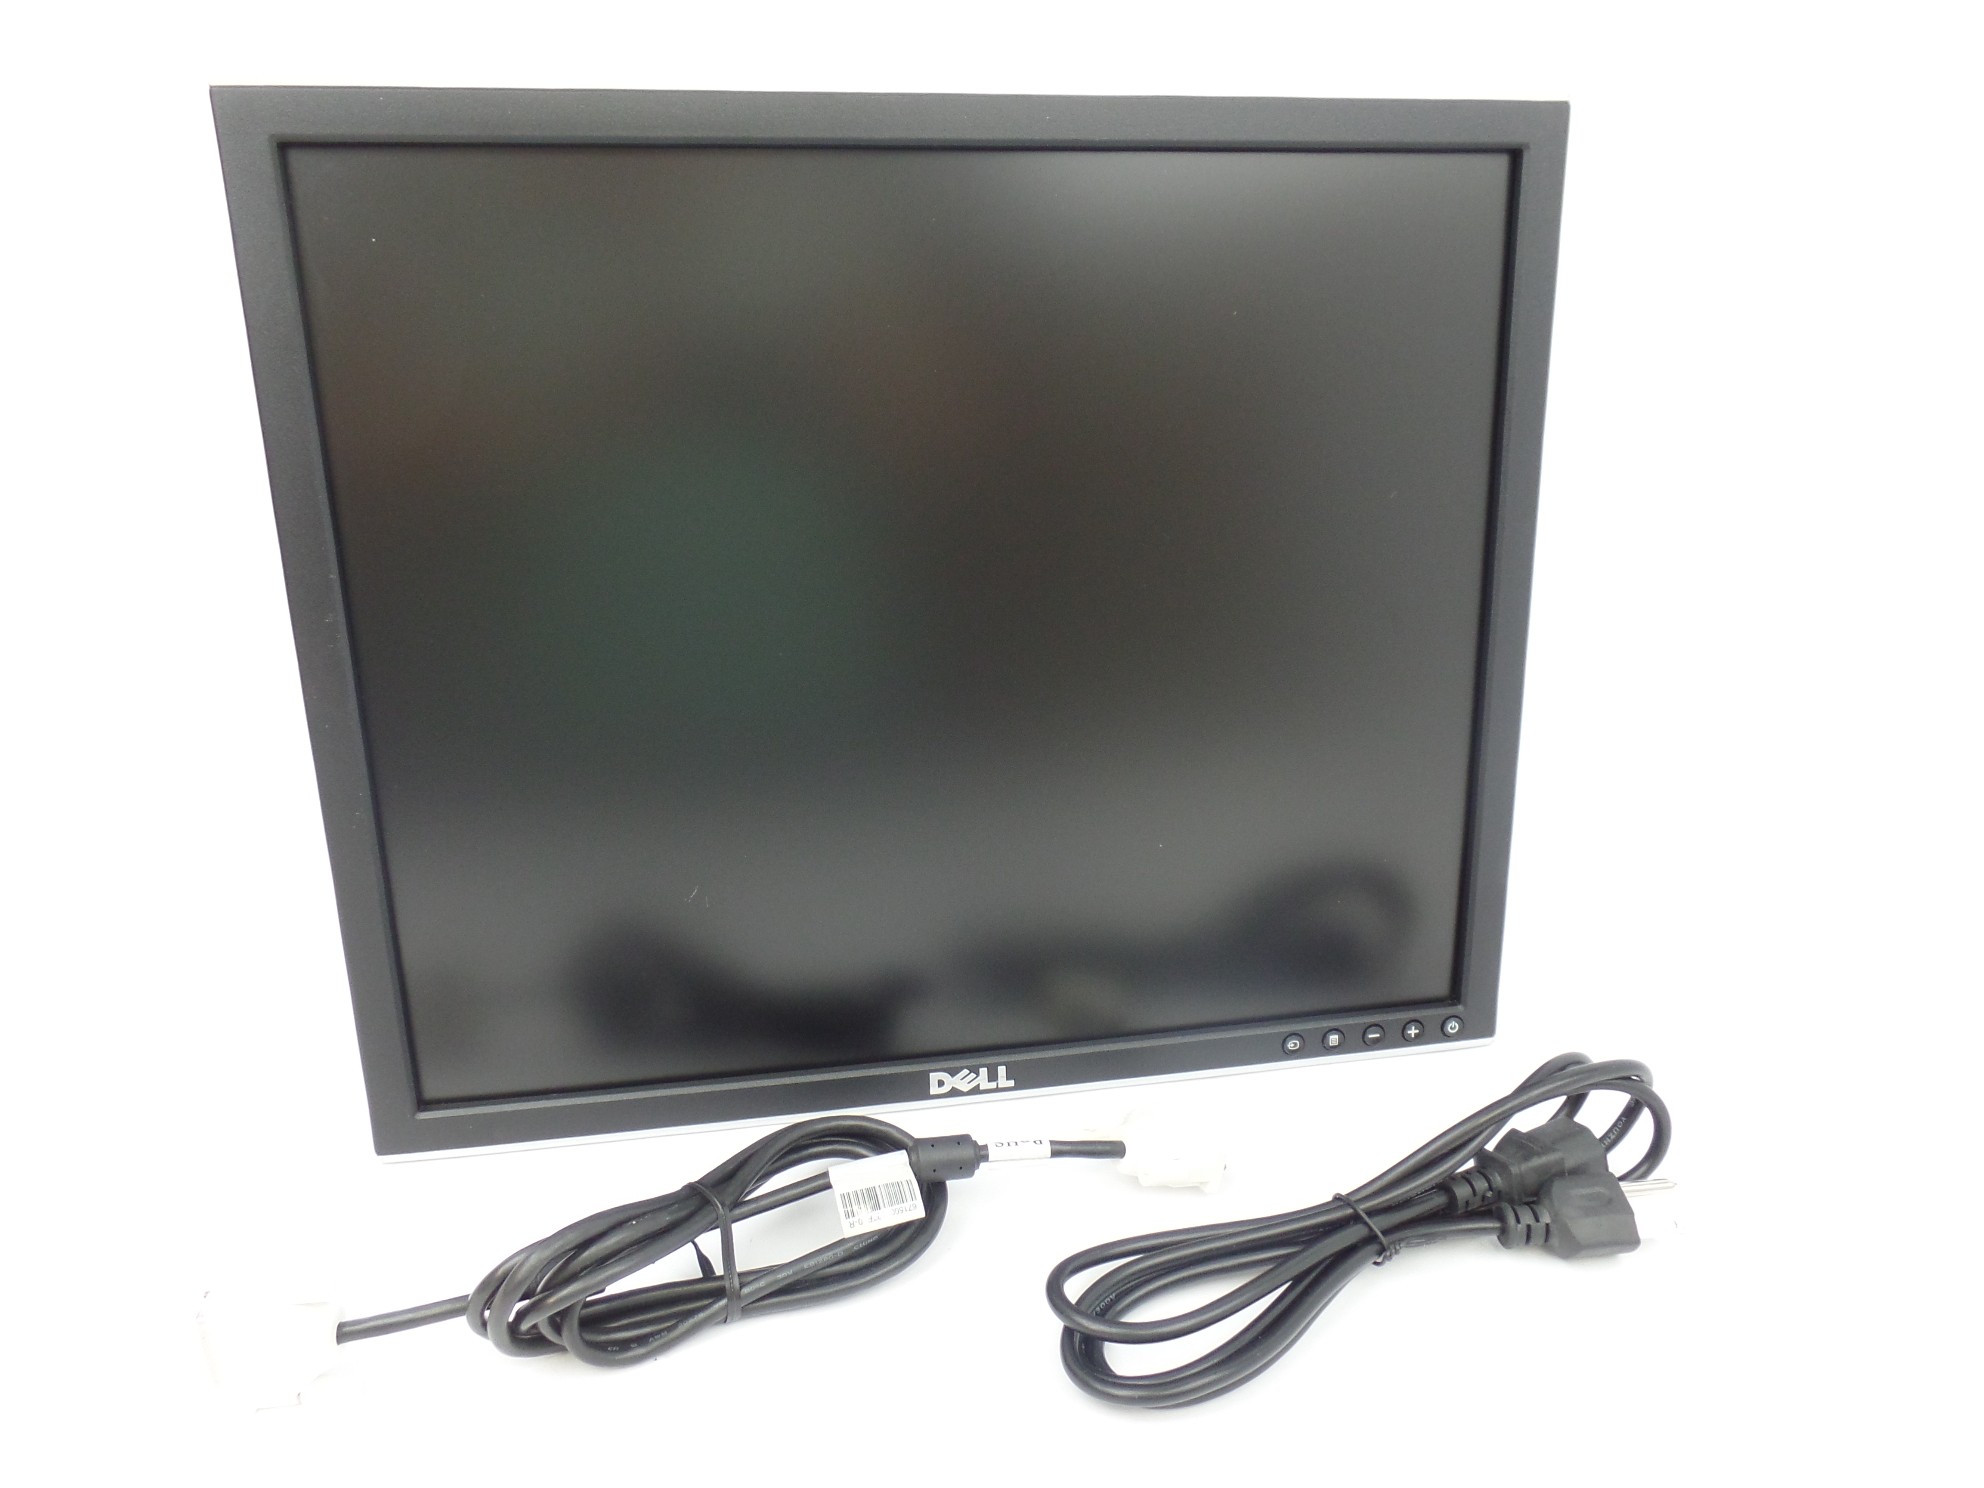 Dell UltraSharp 1907FPt 19" LCD Monitor - no stand